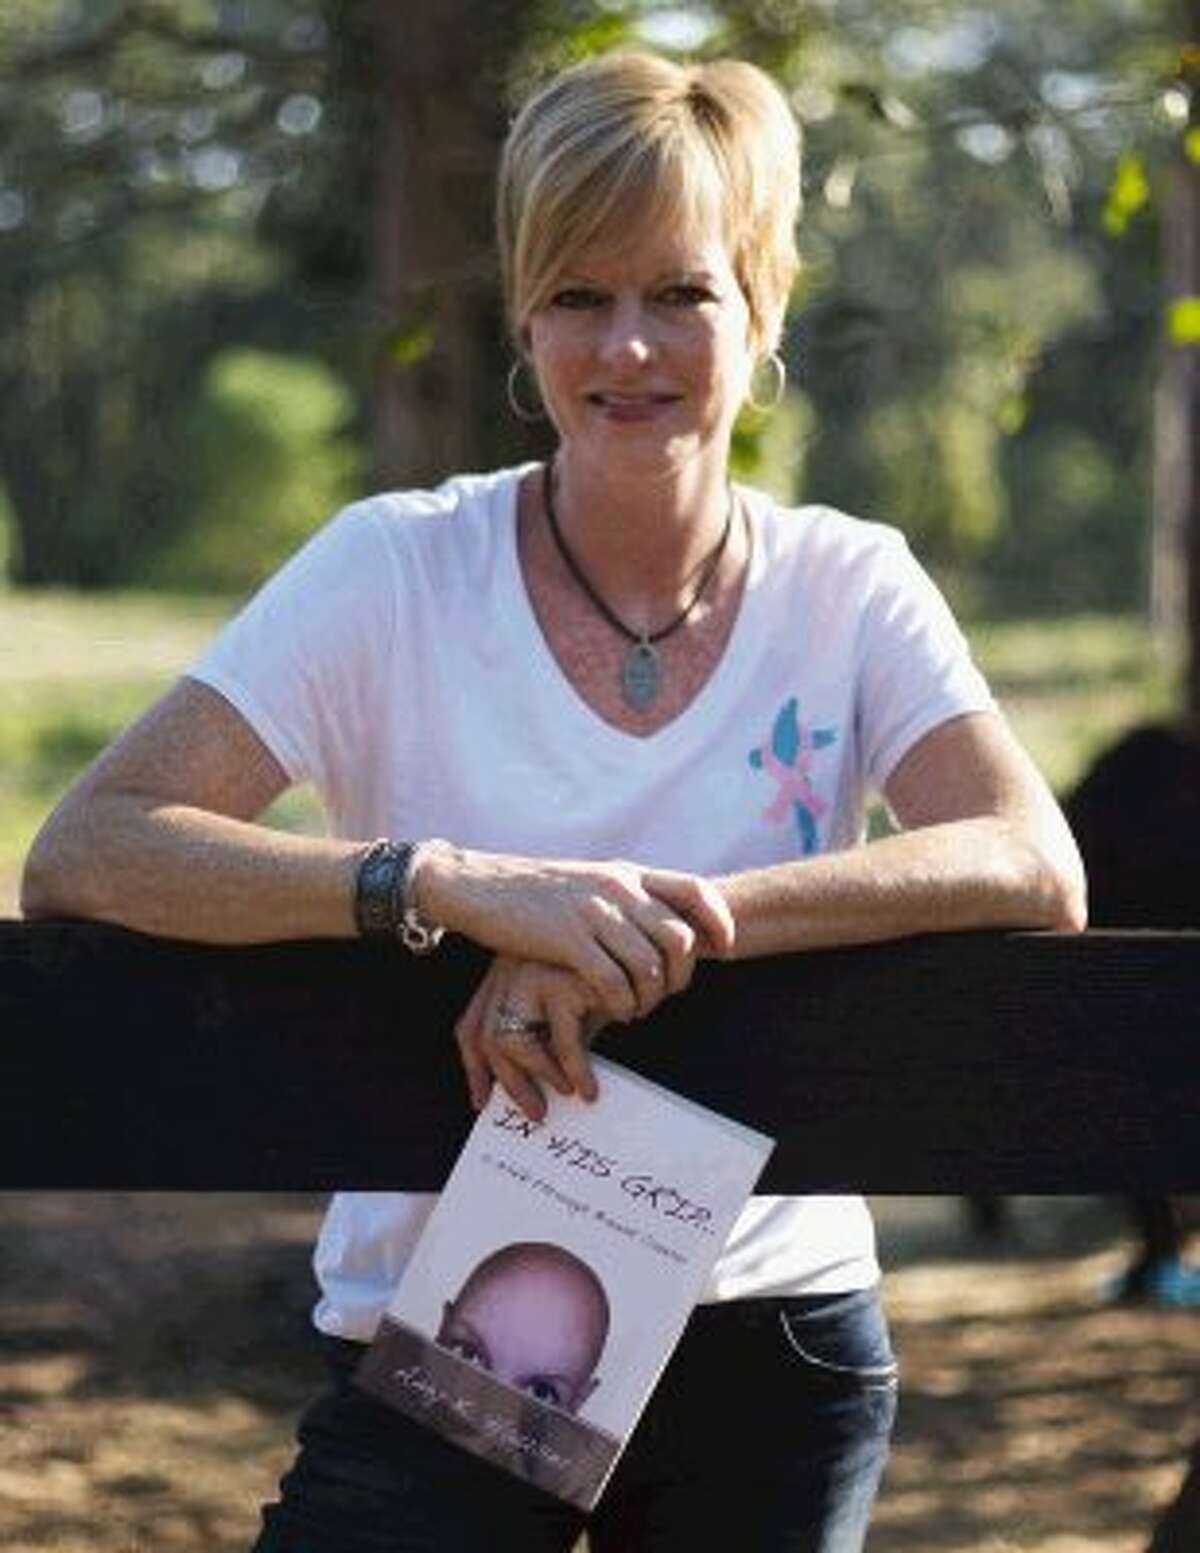 Breast cancer survivor Amy Hauser holds a copy of her book "In His Grip ... A Walk Through Breast Cancer." Hauser runs the ministry Horses-Healing-Hope., which provides equine therapy for women who are post-treatment for breast cancer.